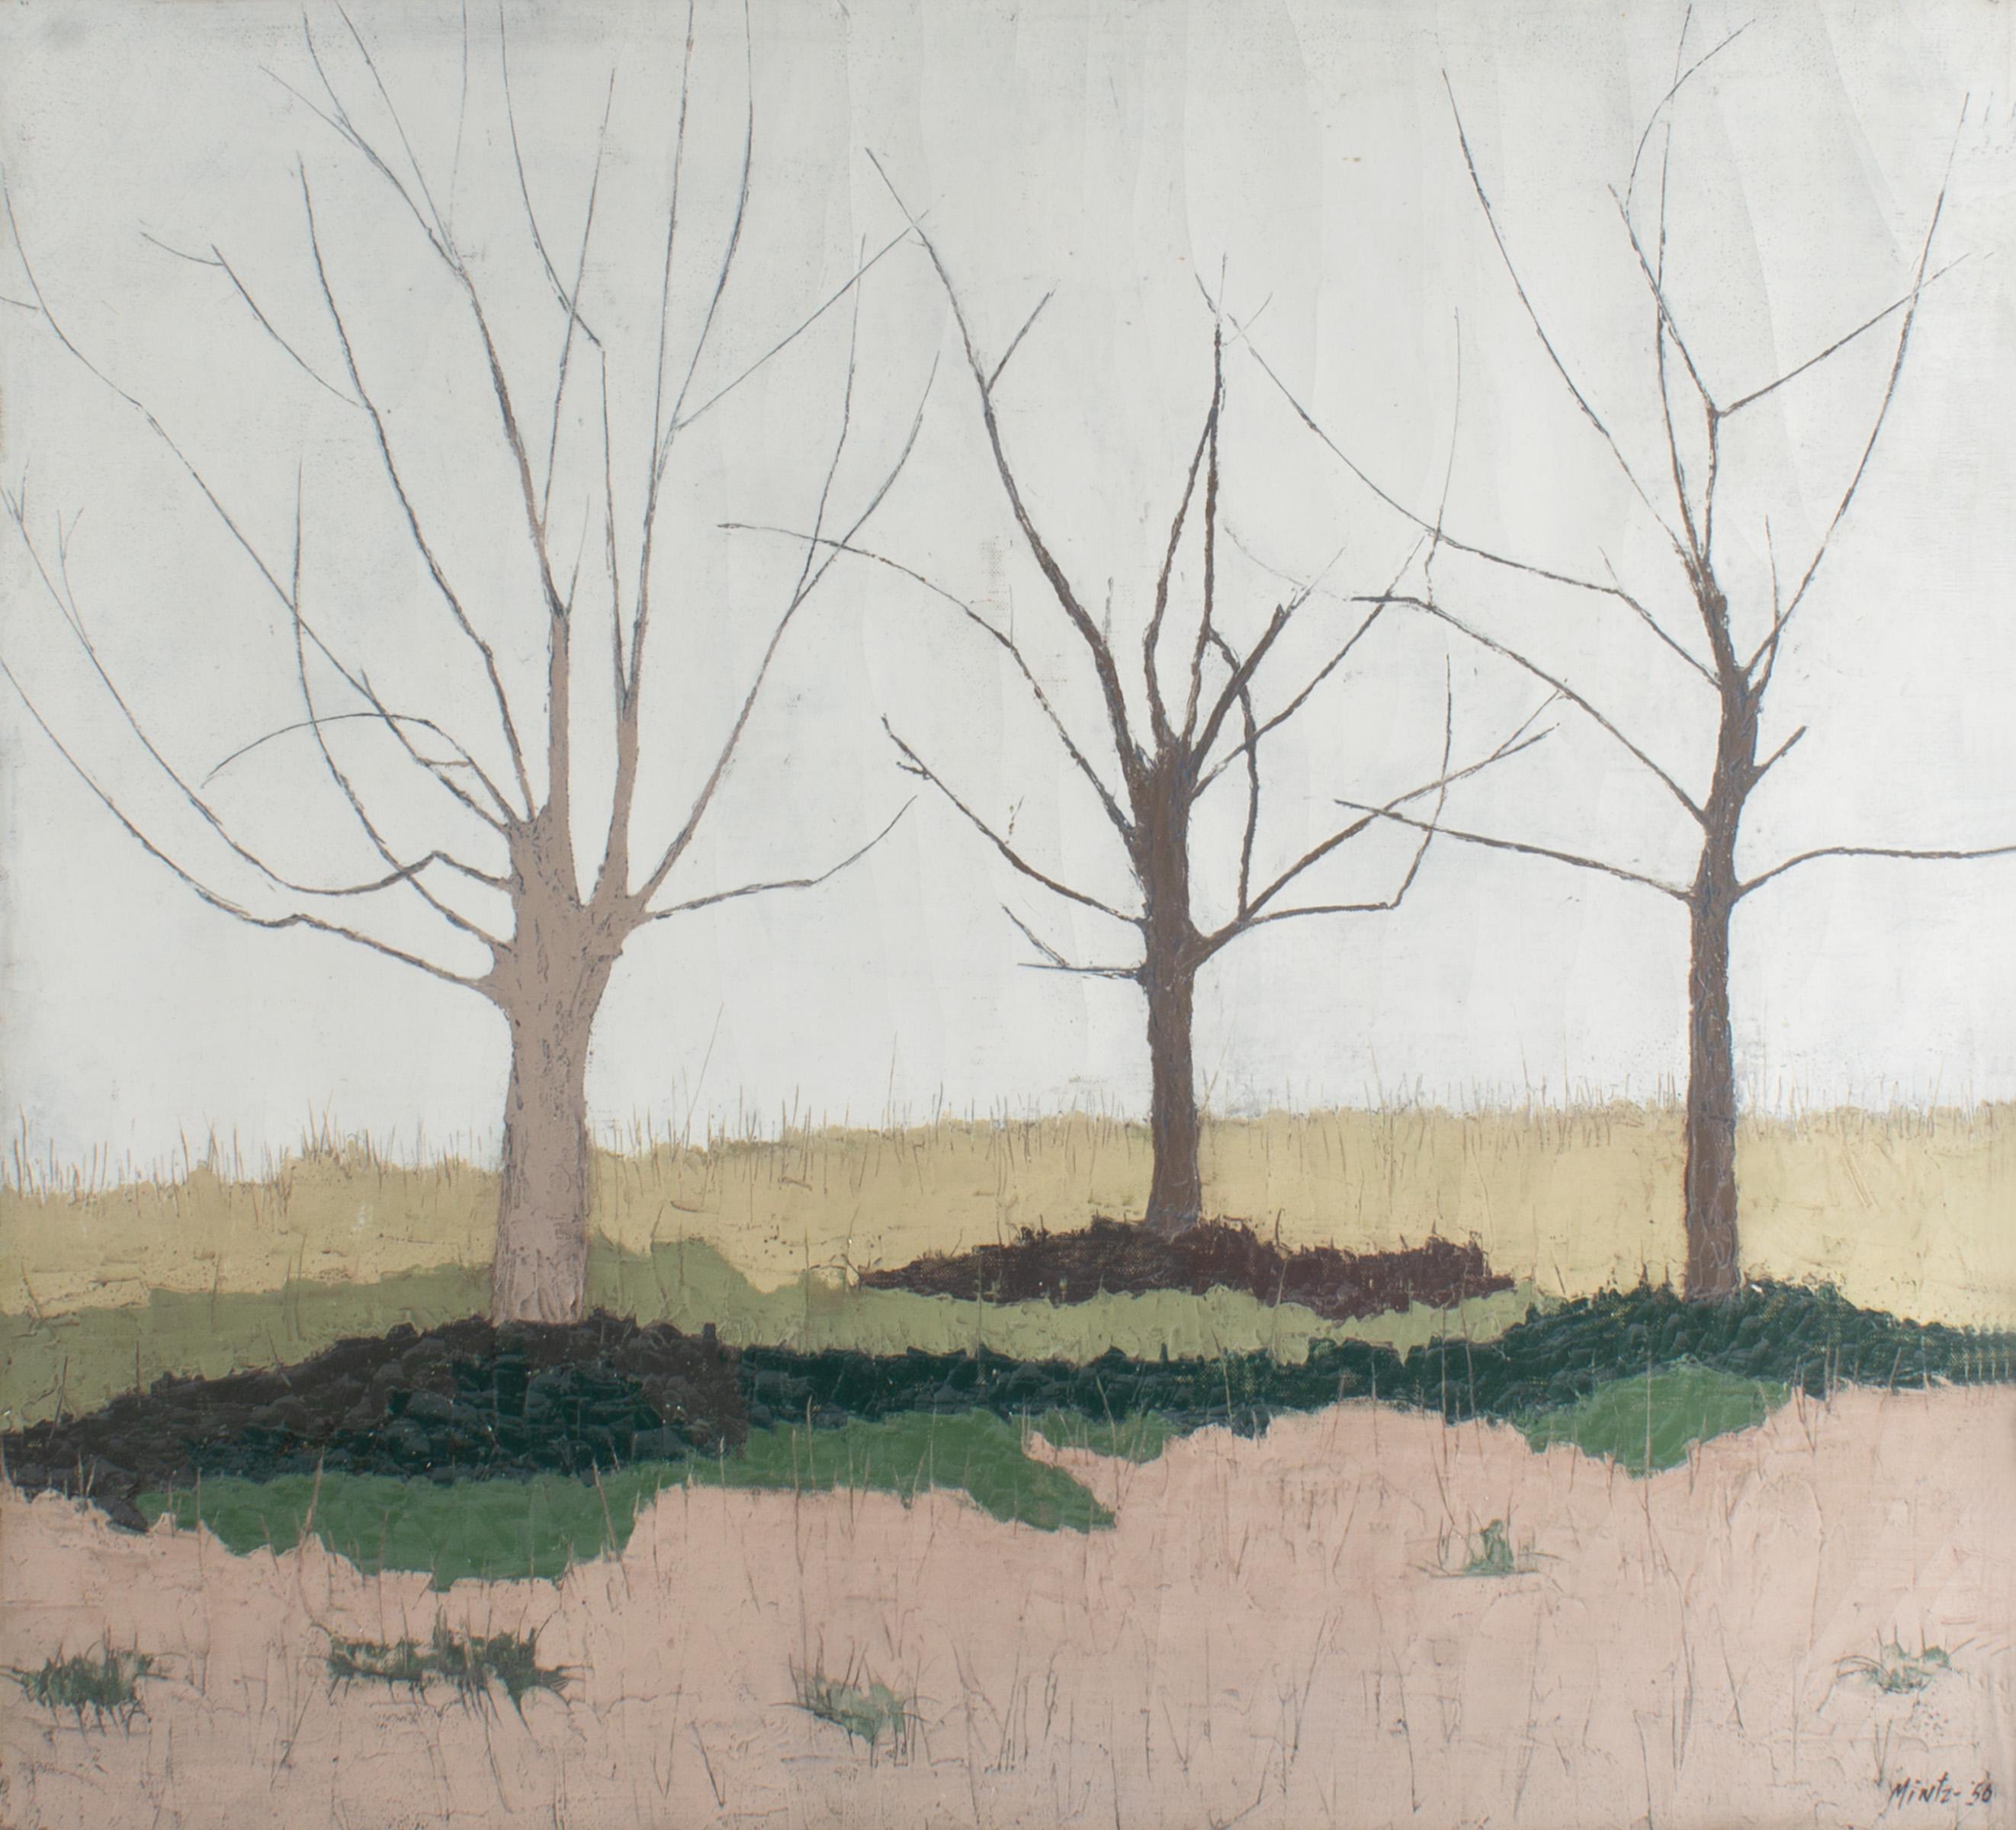 A 1956 abstract oil on canvas board painting of a landscape by American artist Raymond Mintz (1925-2008). Presented in a wood frame, the painting depicts three sparse trees upon a parcel of ground. The trees rise from grassy earth and are grounded